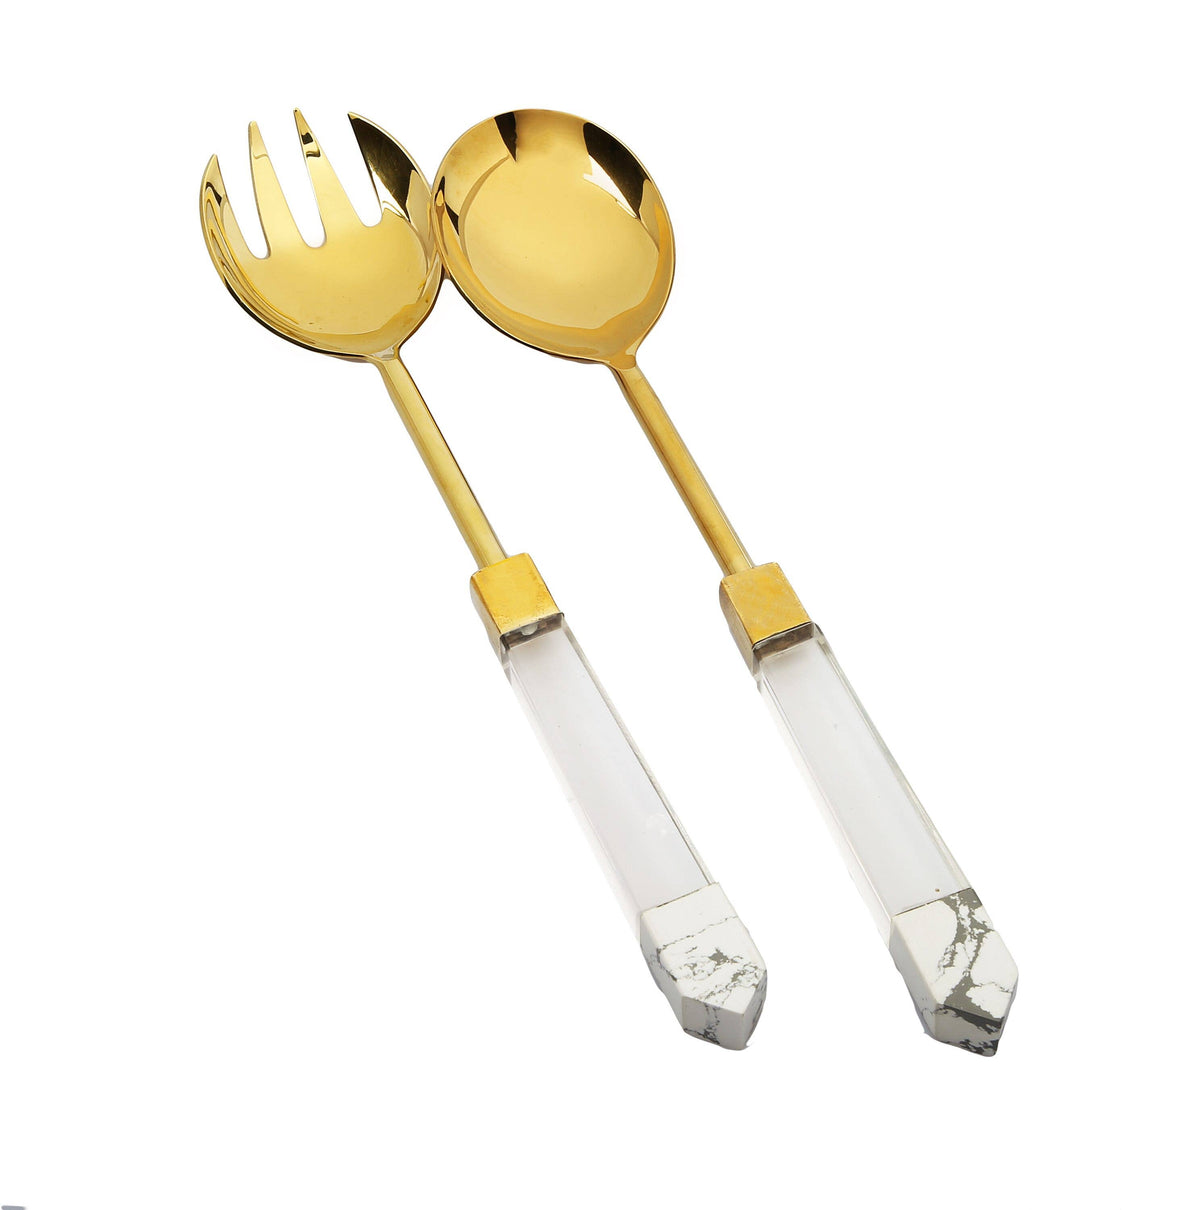 Classic Touch Stainless Steel Salad Servers with Dust Acrylic Handles